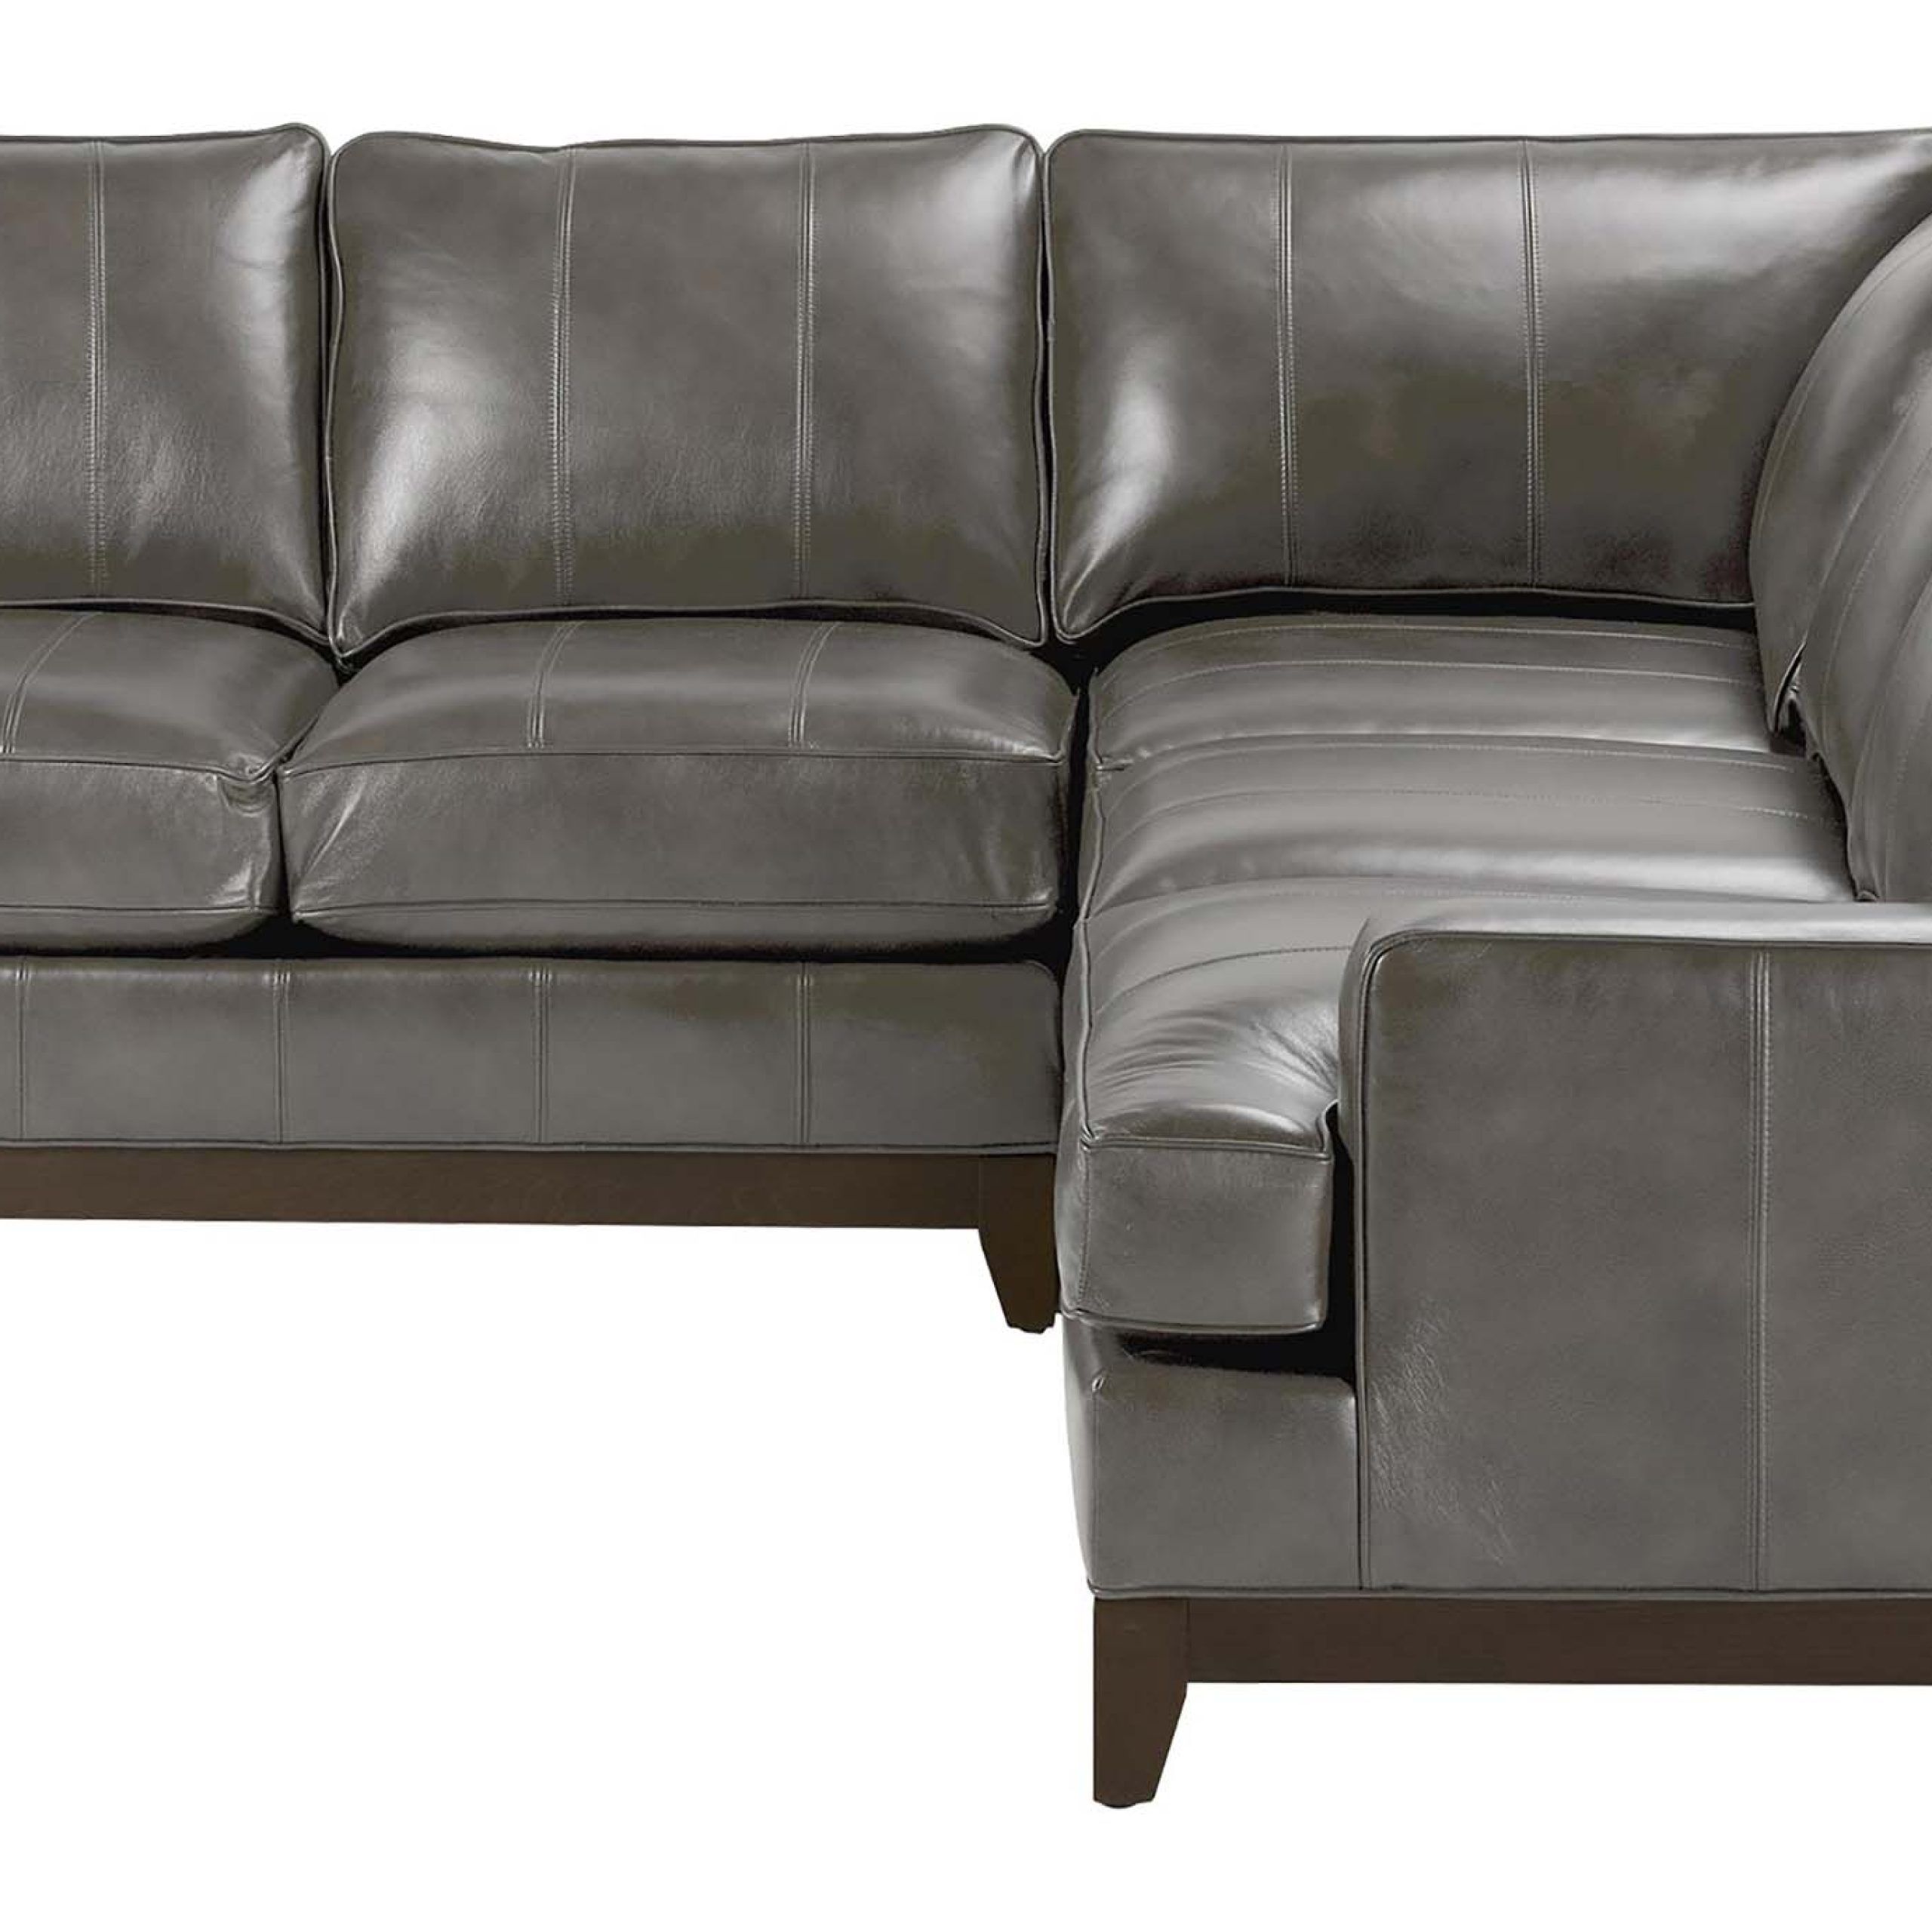 Ethan Allen With Regard To Most Recent 3 Piece Leather Sectional Sofa Sets (View 3 of 15)